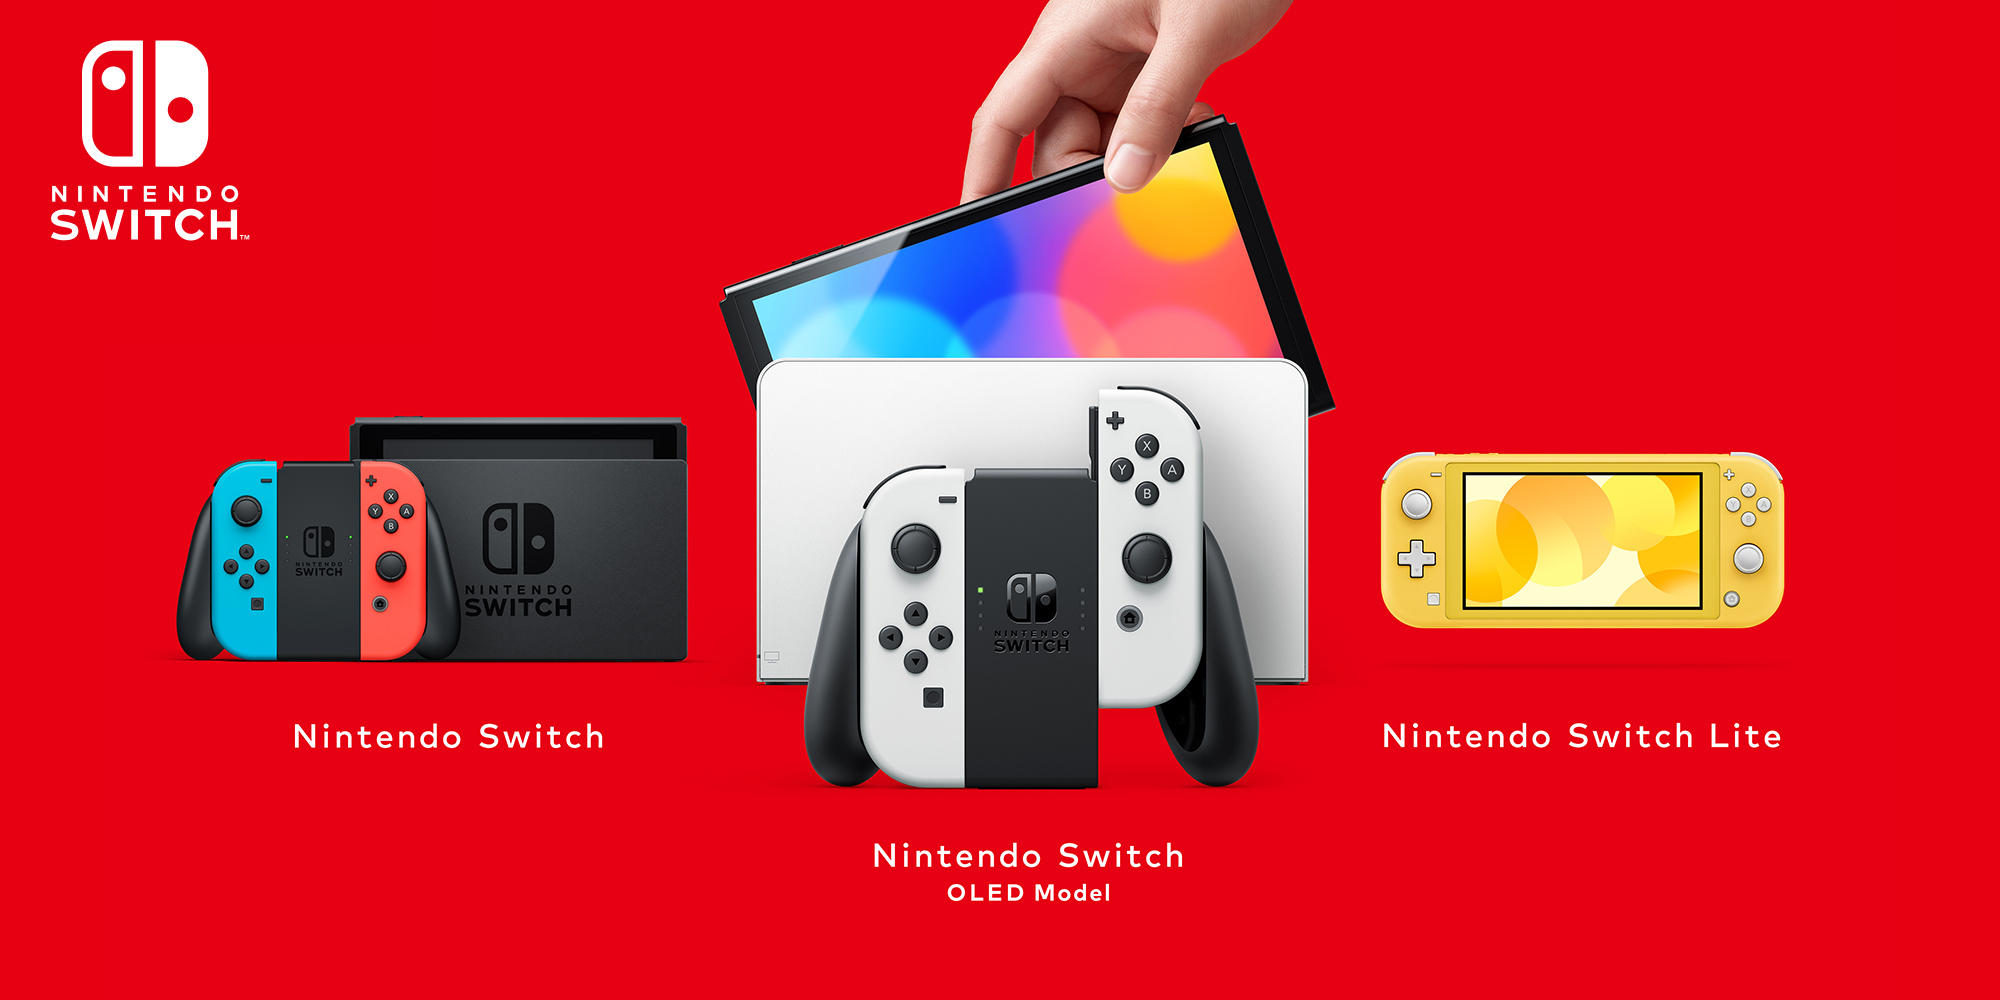 Just got a Nintendo Switch? Take a look at a few of its features!